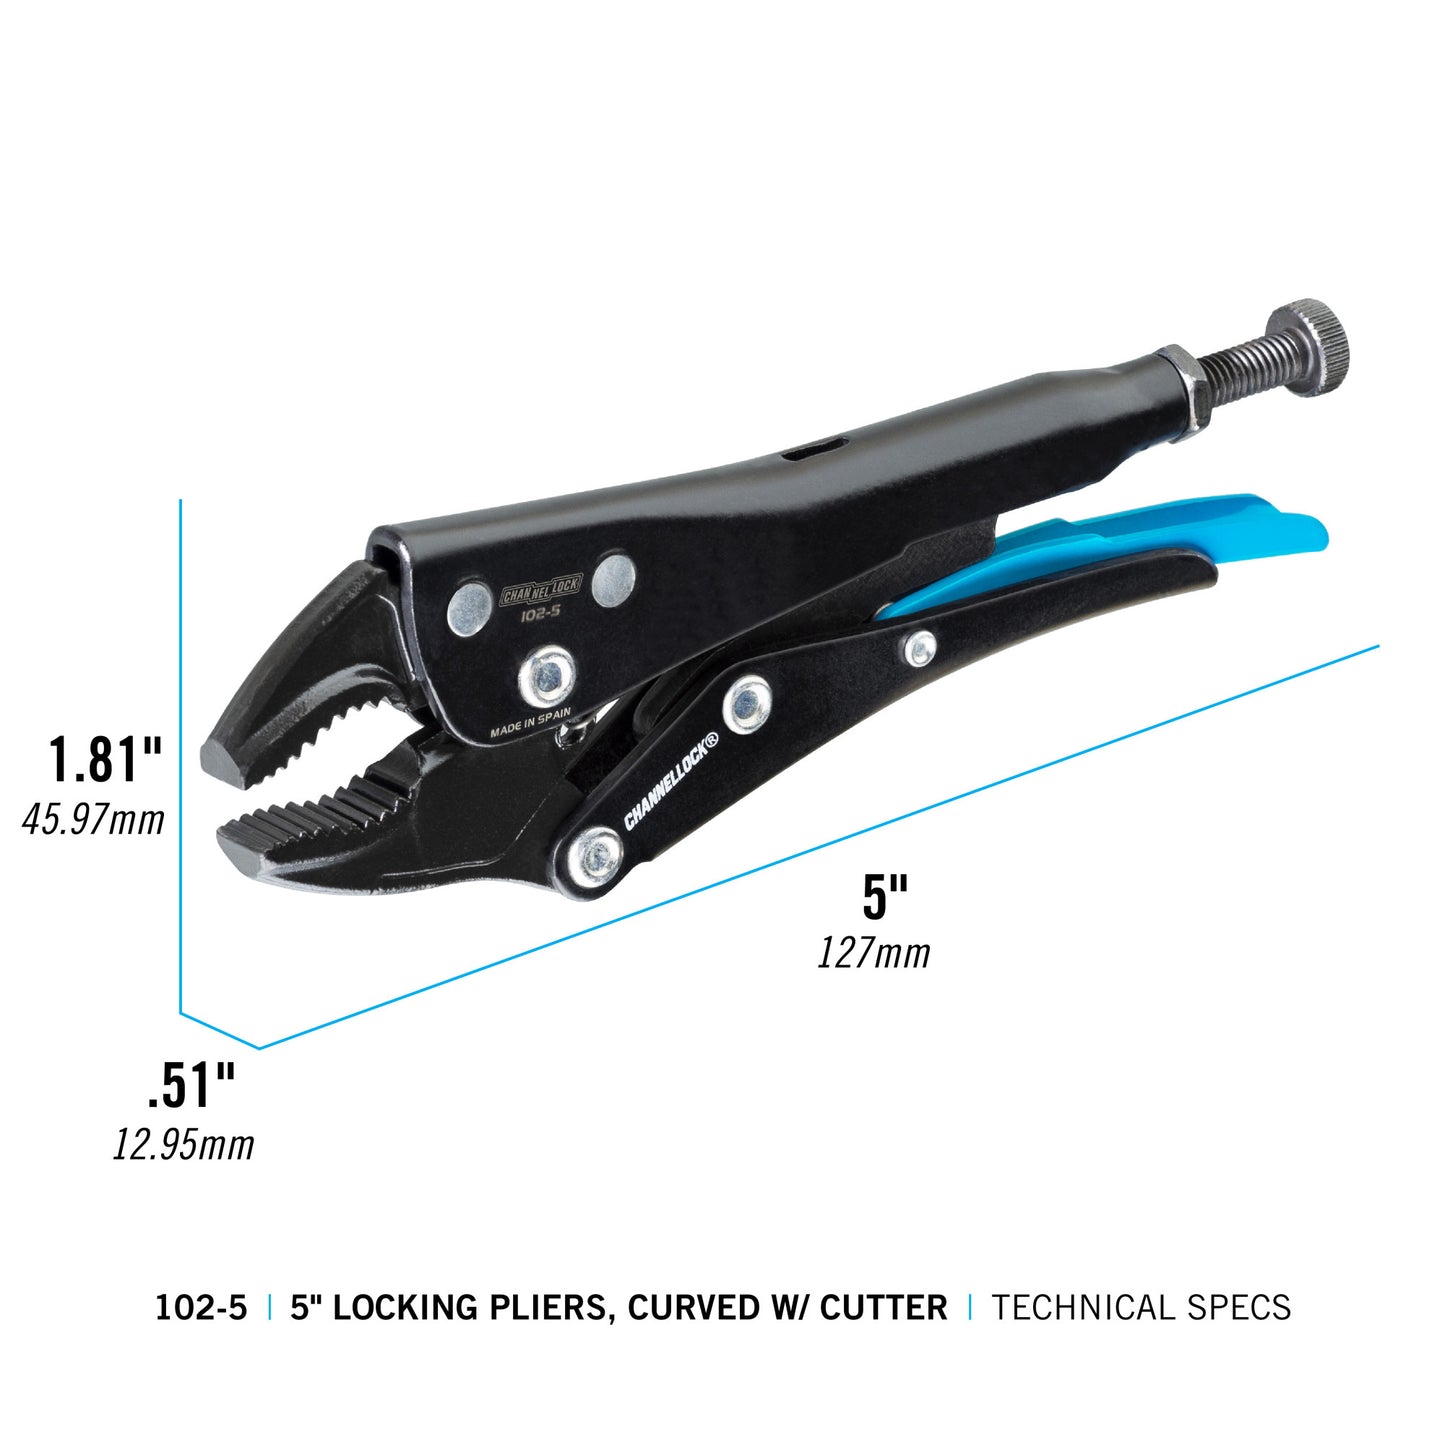 5 Vise Grip Pliers with Cutter